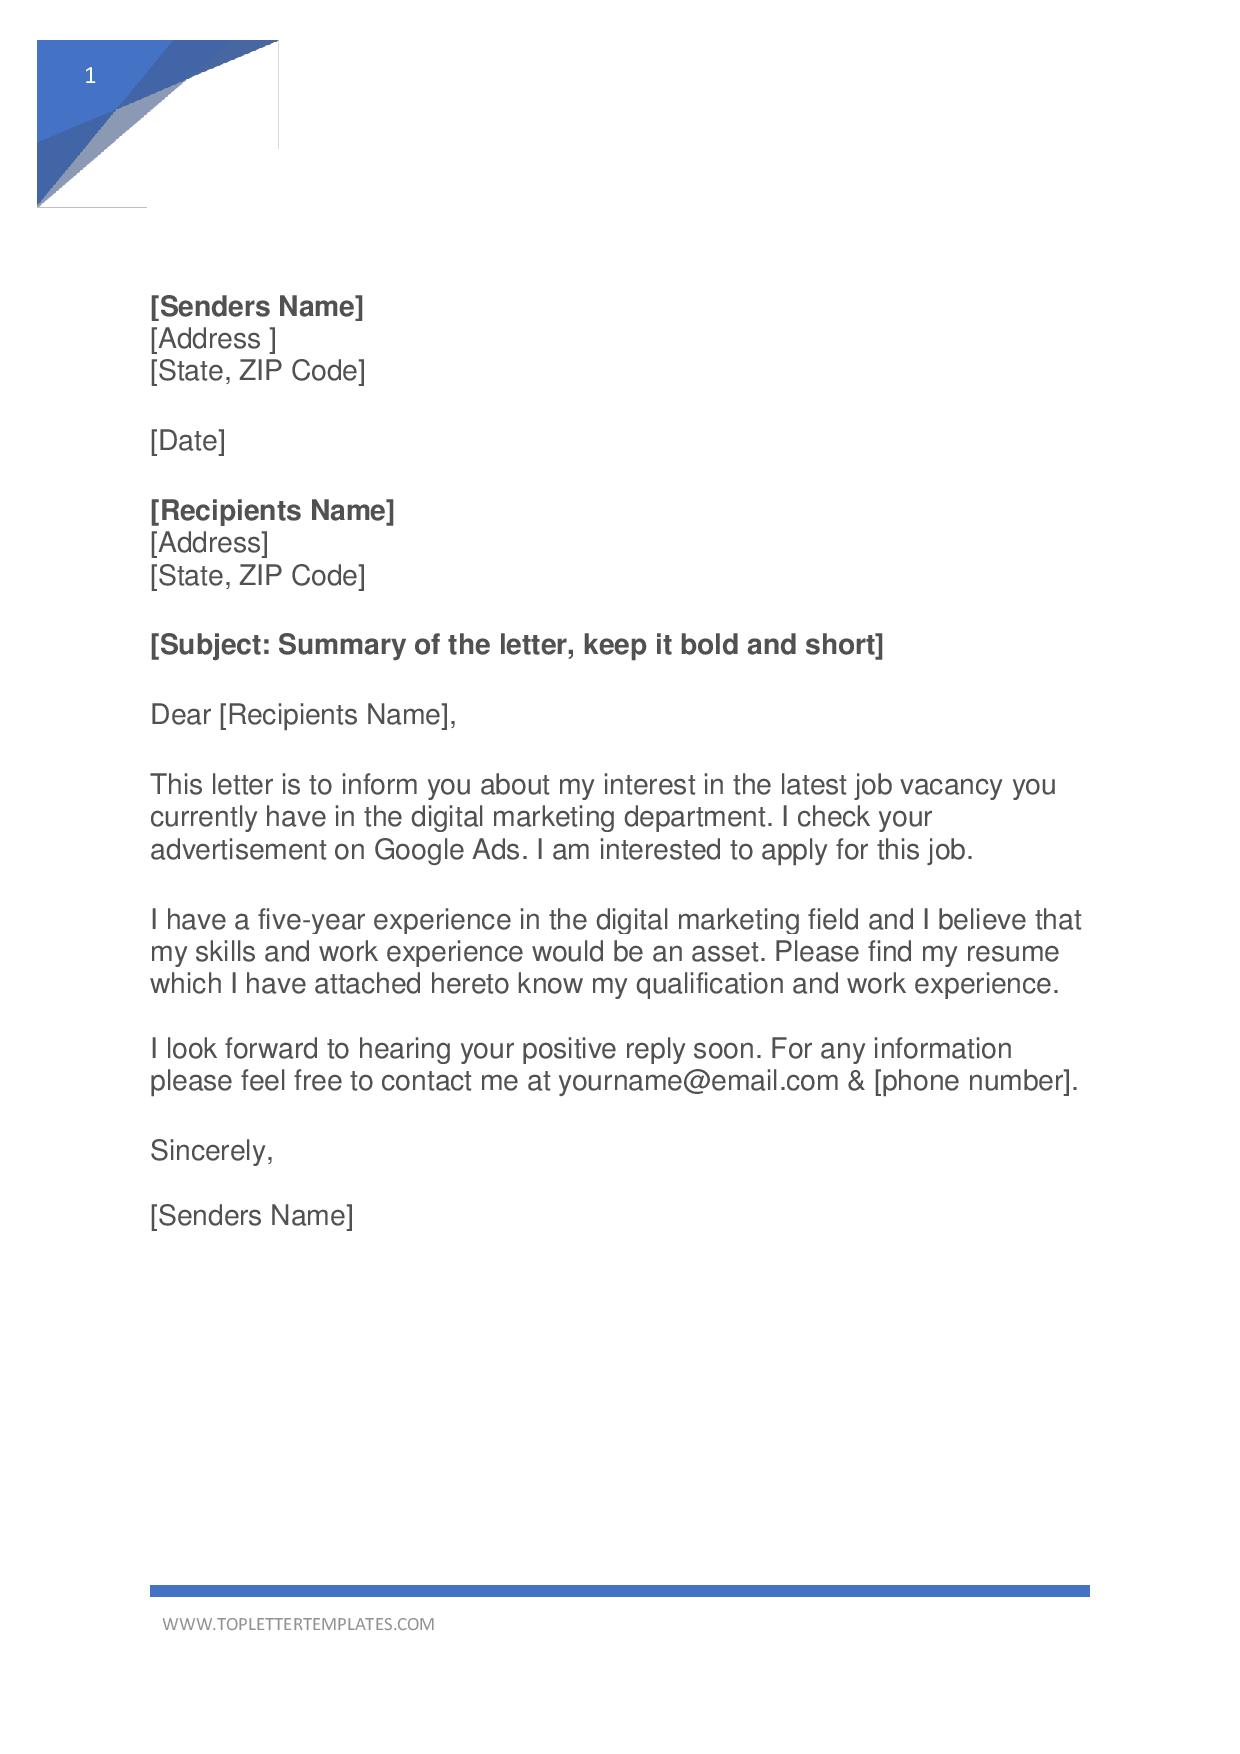 Simple Cover Letter For Job from toplettertemplates.com